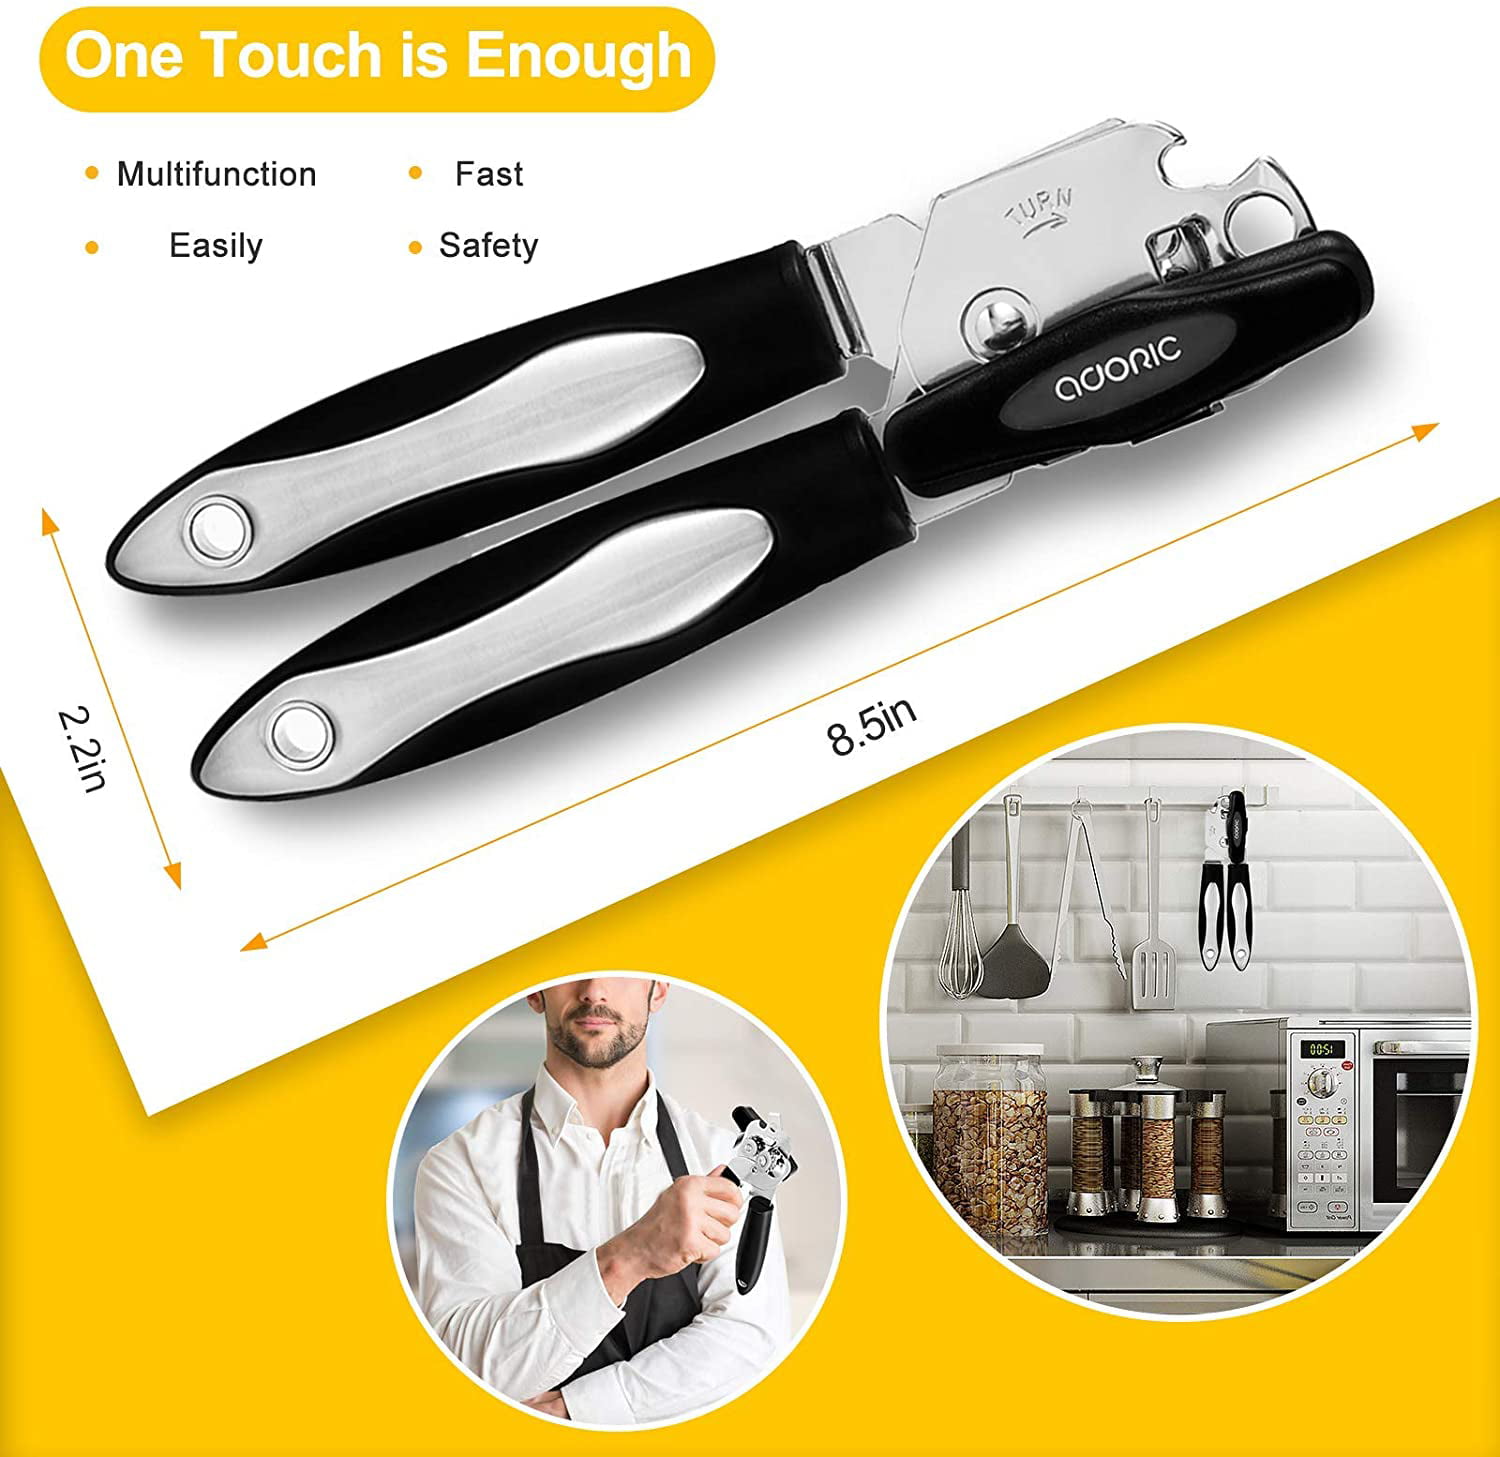 Grey Heavy Duty Can Opener for The Elderly Good Grips Ergonomic Handle PLASTIFIC Kitchen Can Openers Manual Stainless Steel Tin Opener No Sharp Edges 